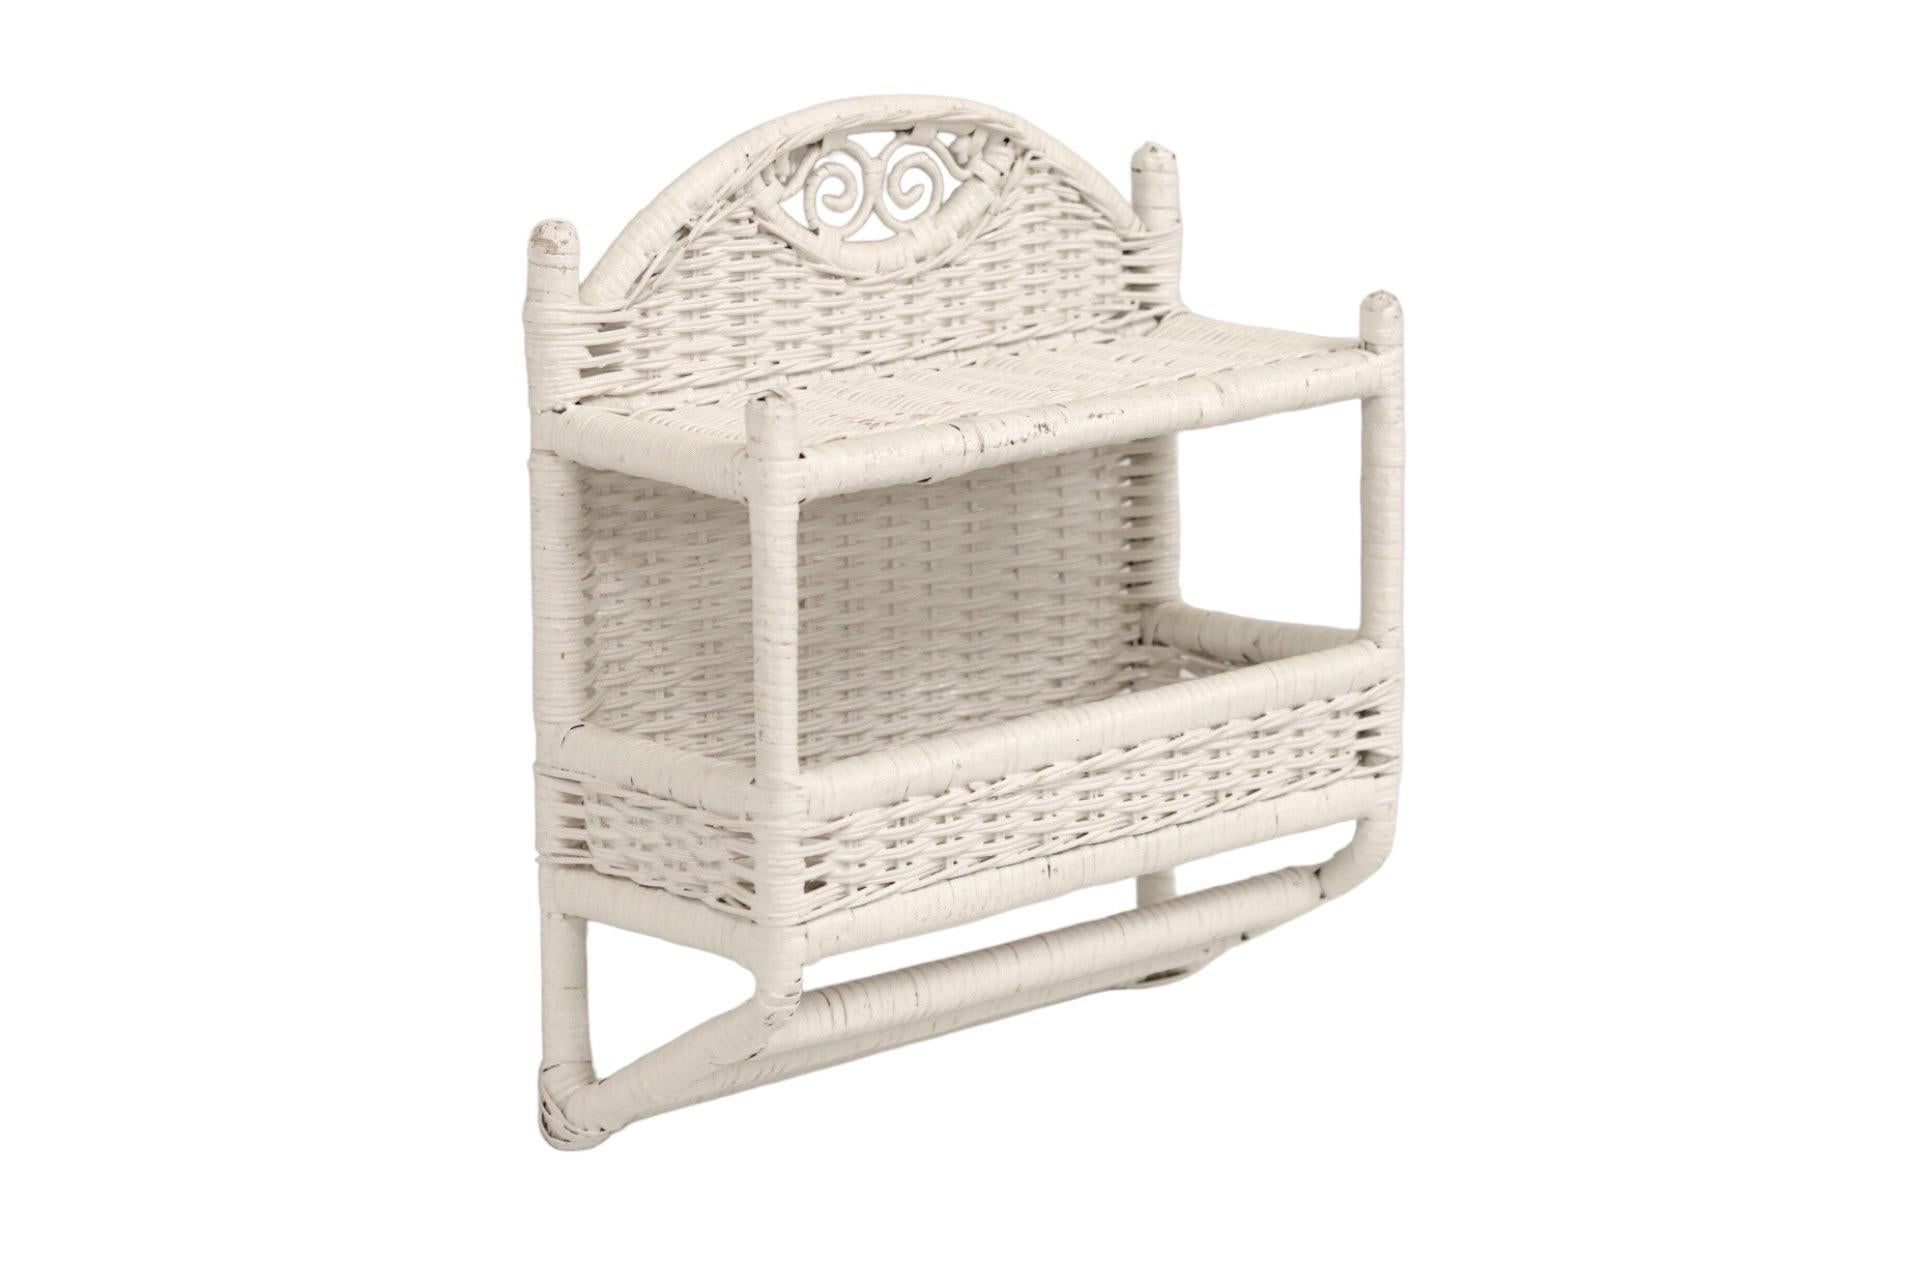 A white bamboo and wicker wall shelf unit. A bamboo frame supports two wicker shelves secured with rattan. Shelves are surmounted with a pierced arch decorated with two scrolls. The lower shelf has small walls and underneath are three rattan bars.